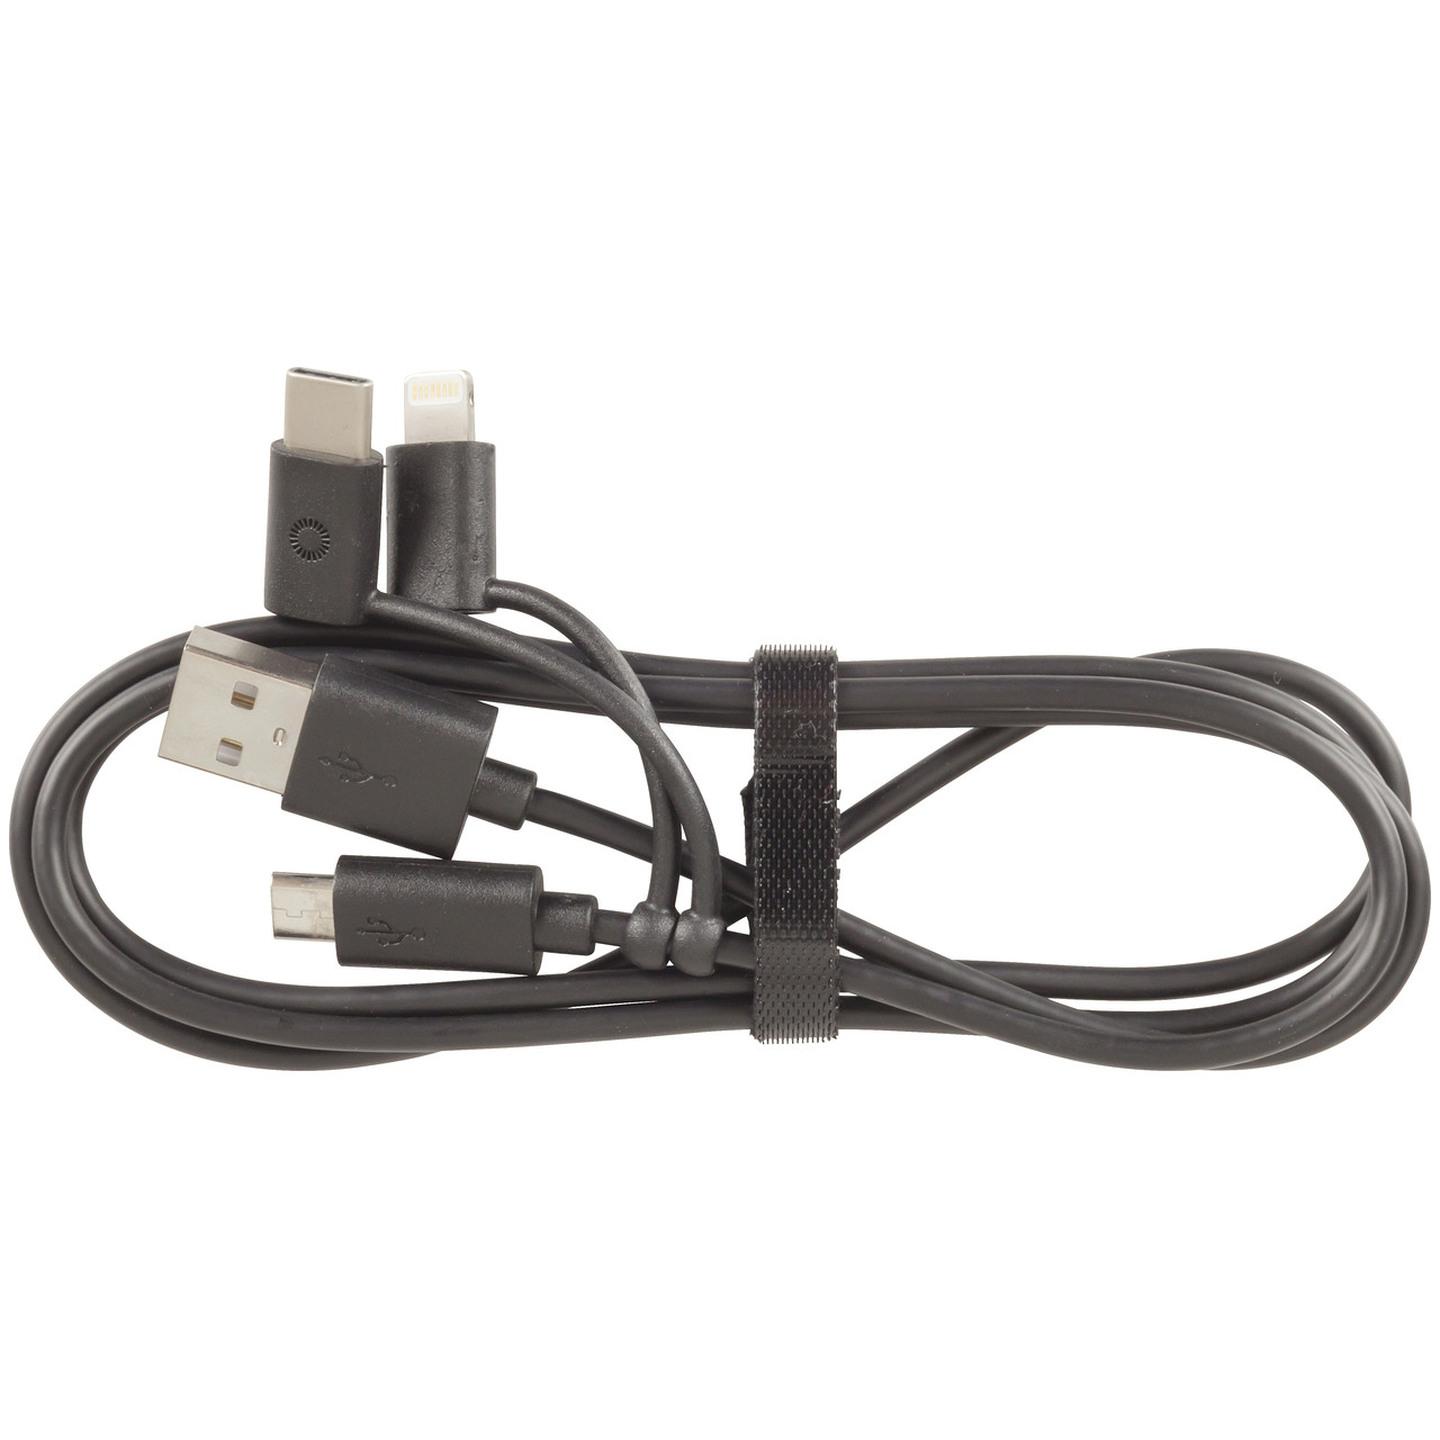 USB lead with 3 in 1 Micro B / Type-C / Lightning Connector - 1m